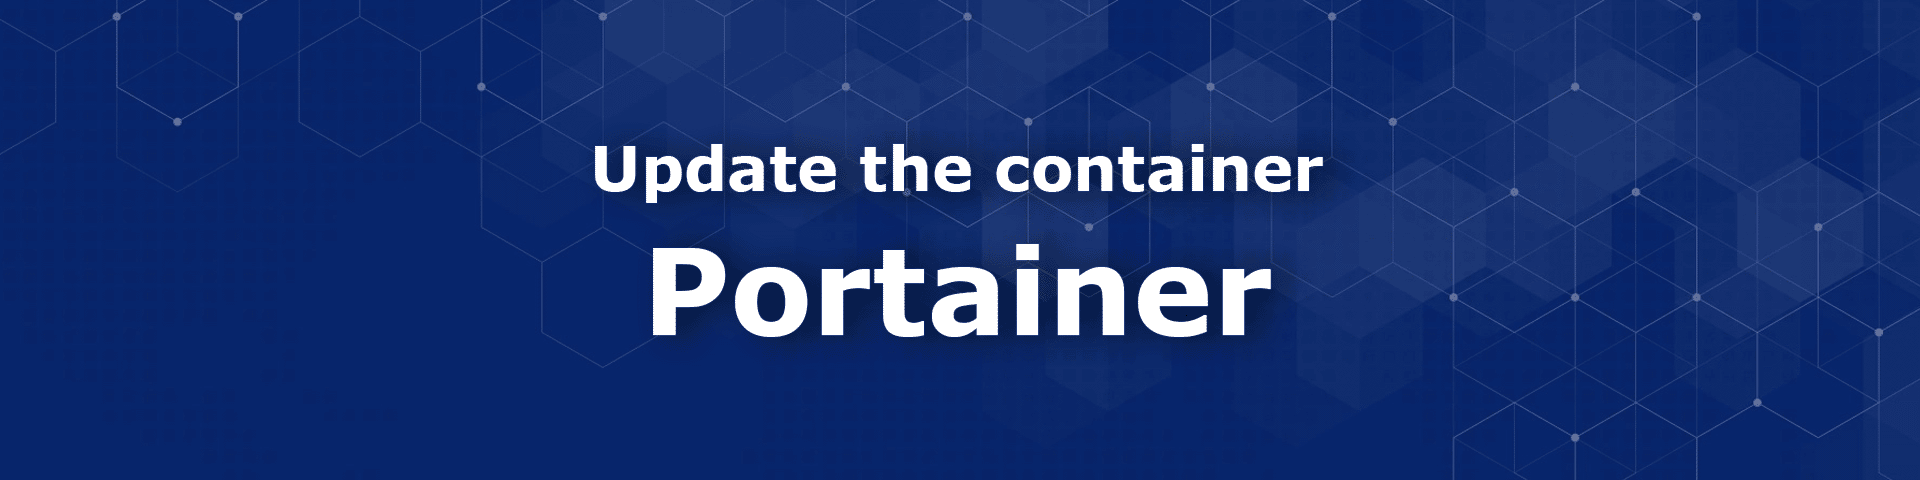 Update the Portainer container